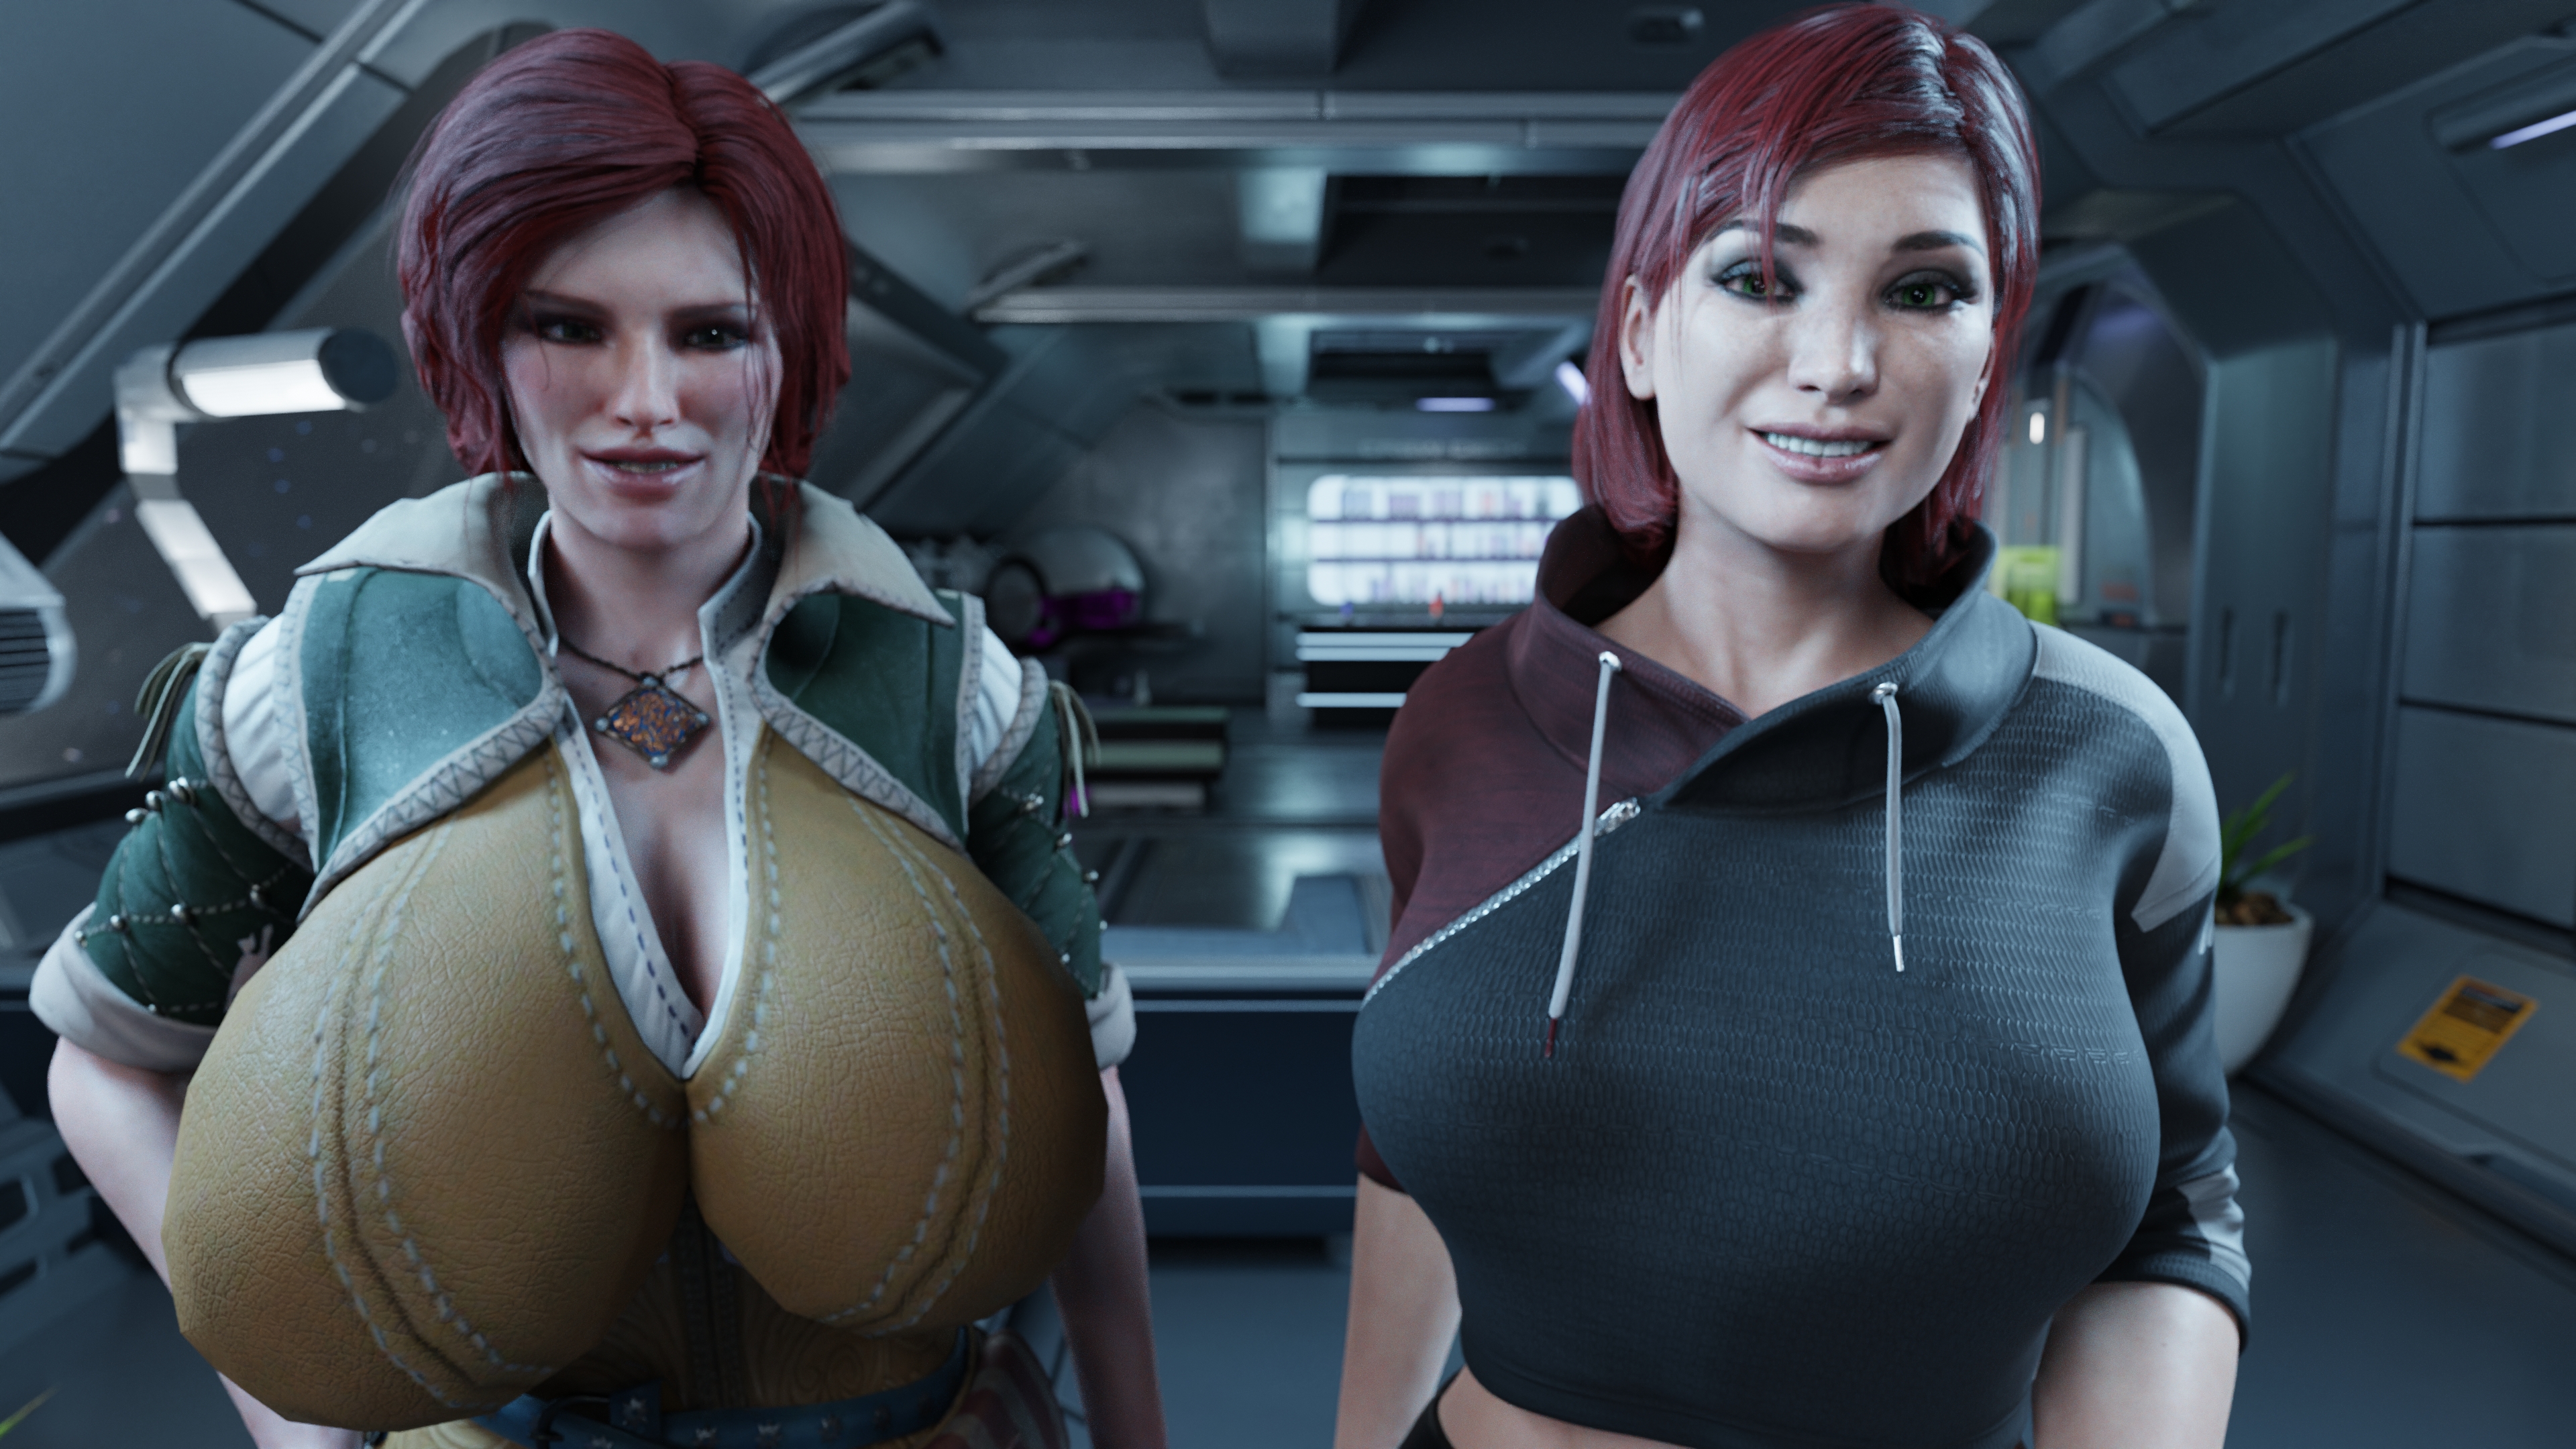 Triss & Jane Mass Effect The Witcher Triss Merigold Femshep Big Tits Red Hair Red head 2 Girls Big Breasts Tongue Out Grab Boobs Smile Green Eyes